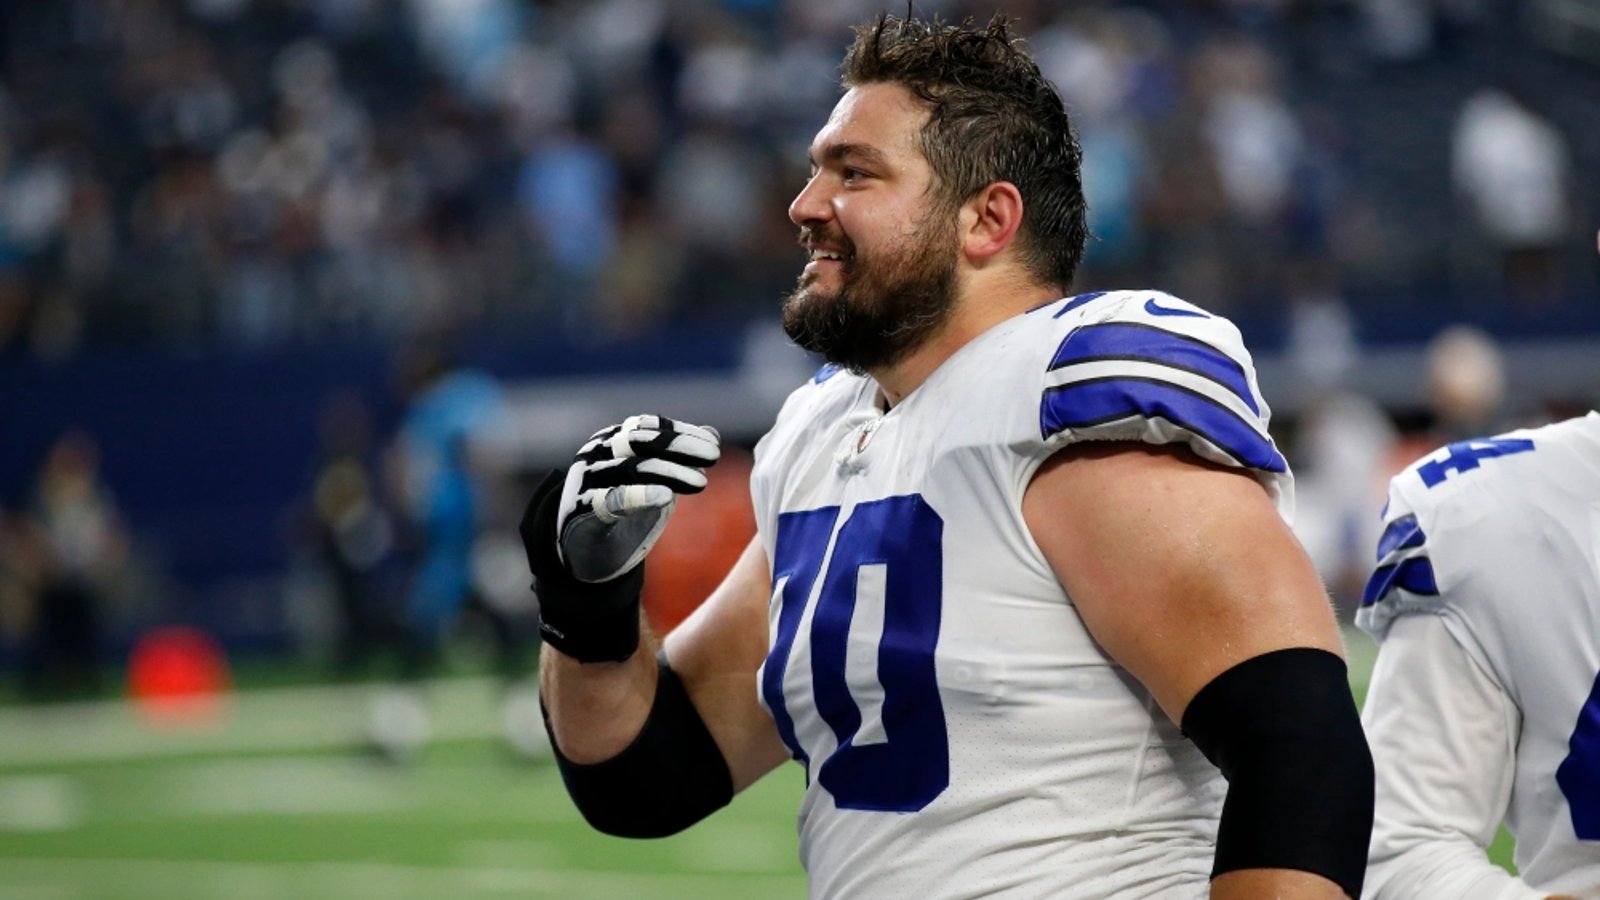 Major breakthrough in Cowboys holdout Zack Martin's situation 